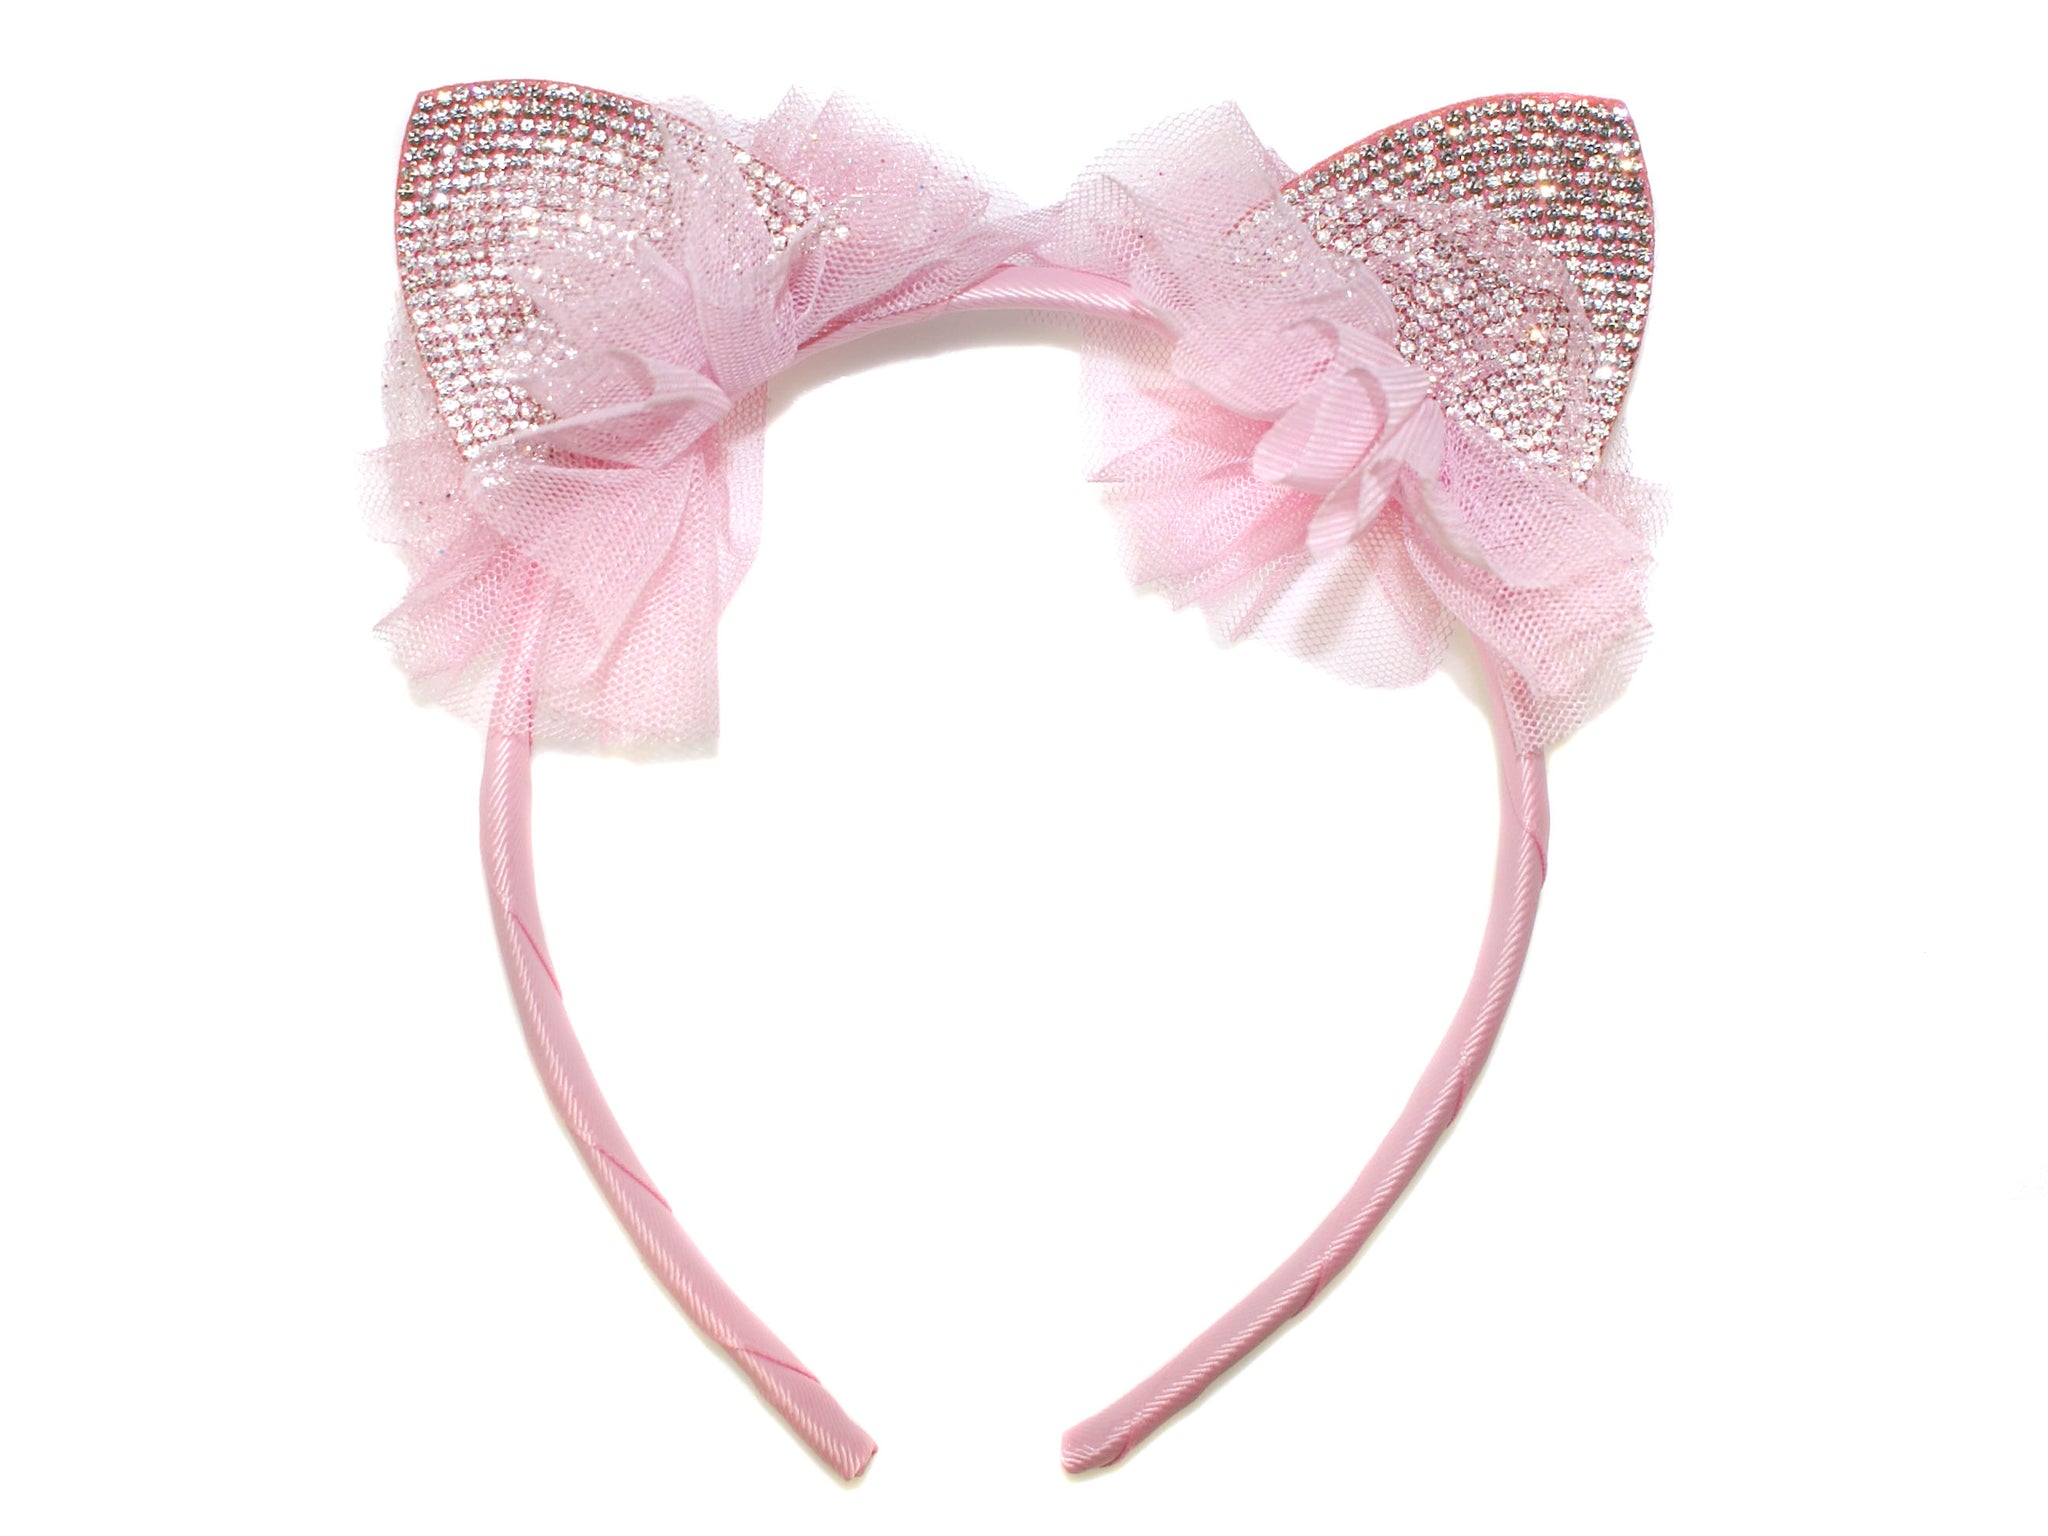 Diamante Tulle Cat Ears Alice Band - Light Pink